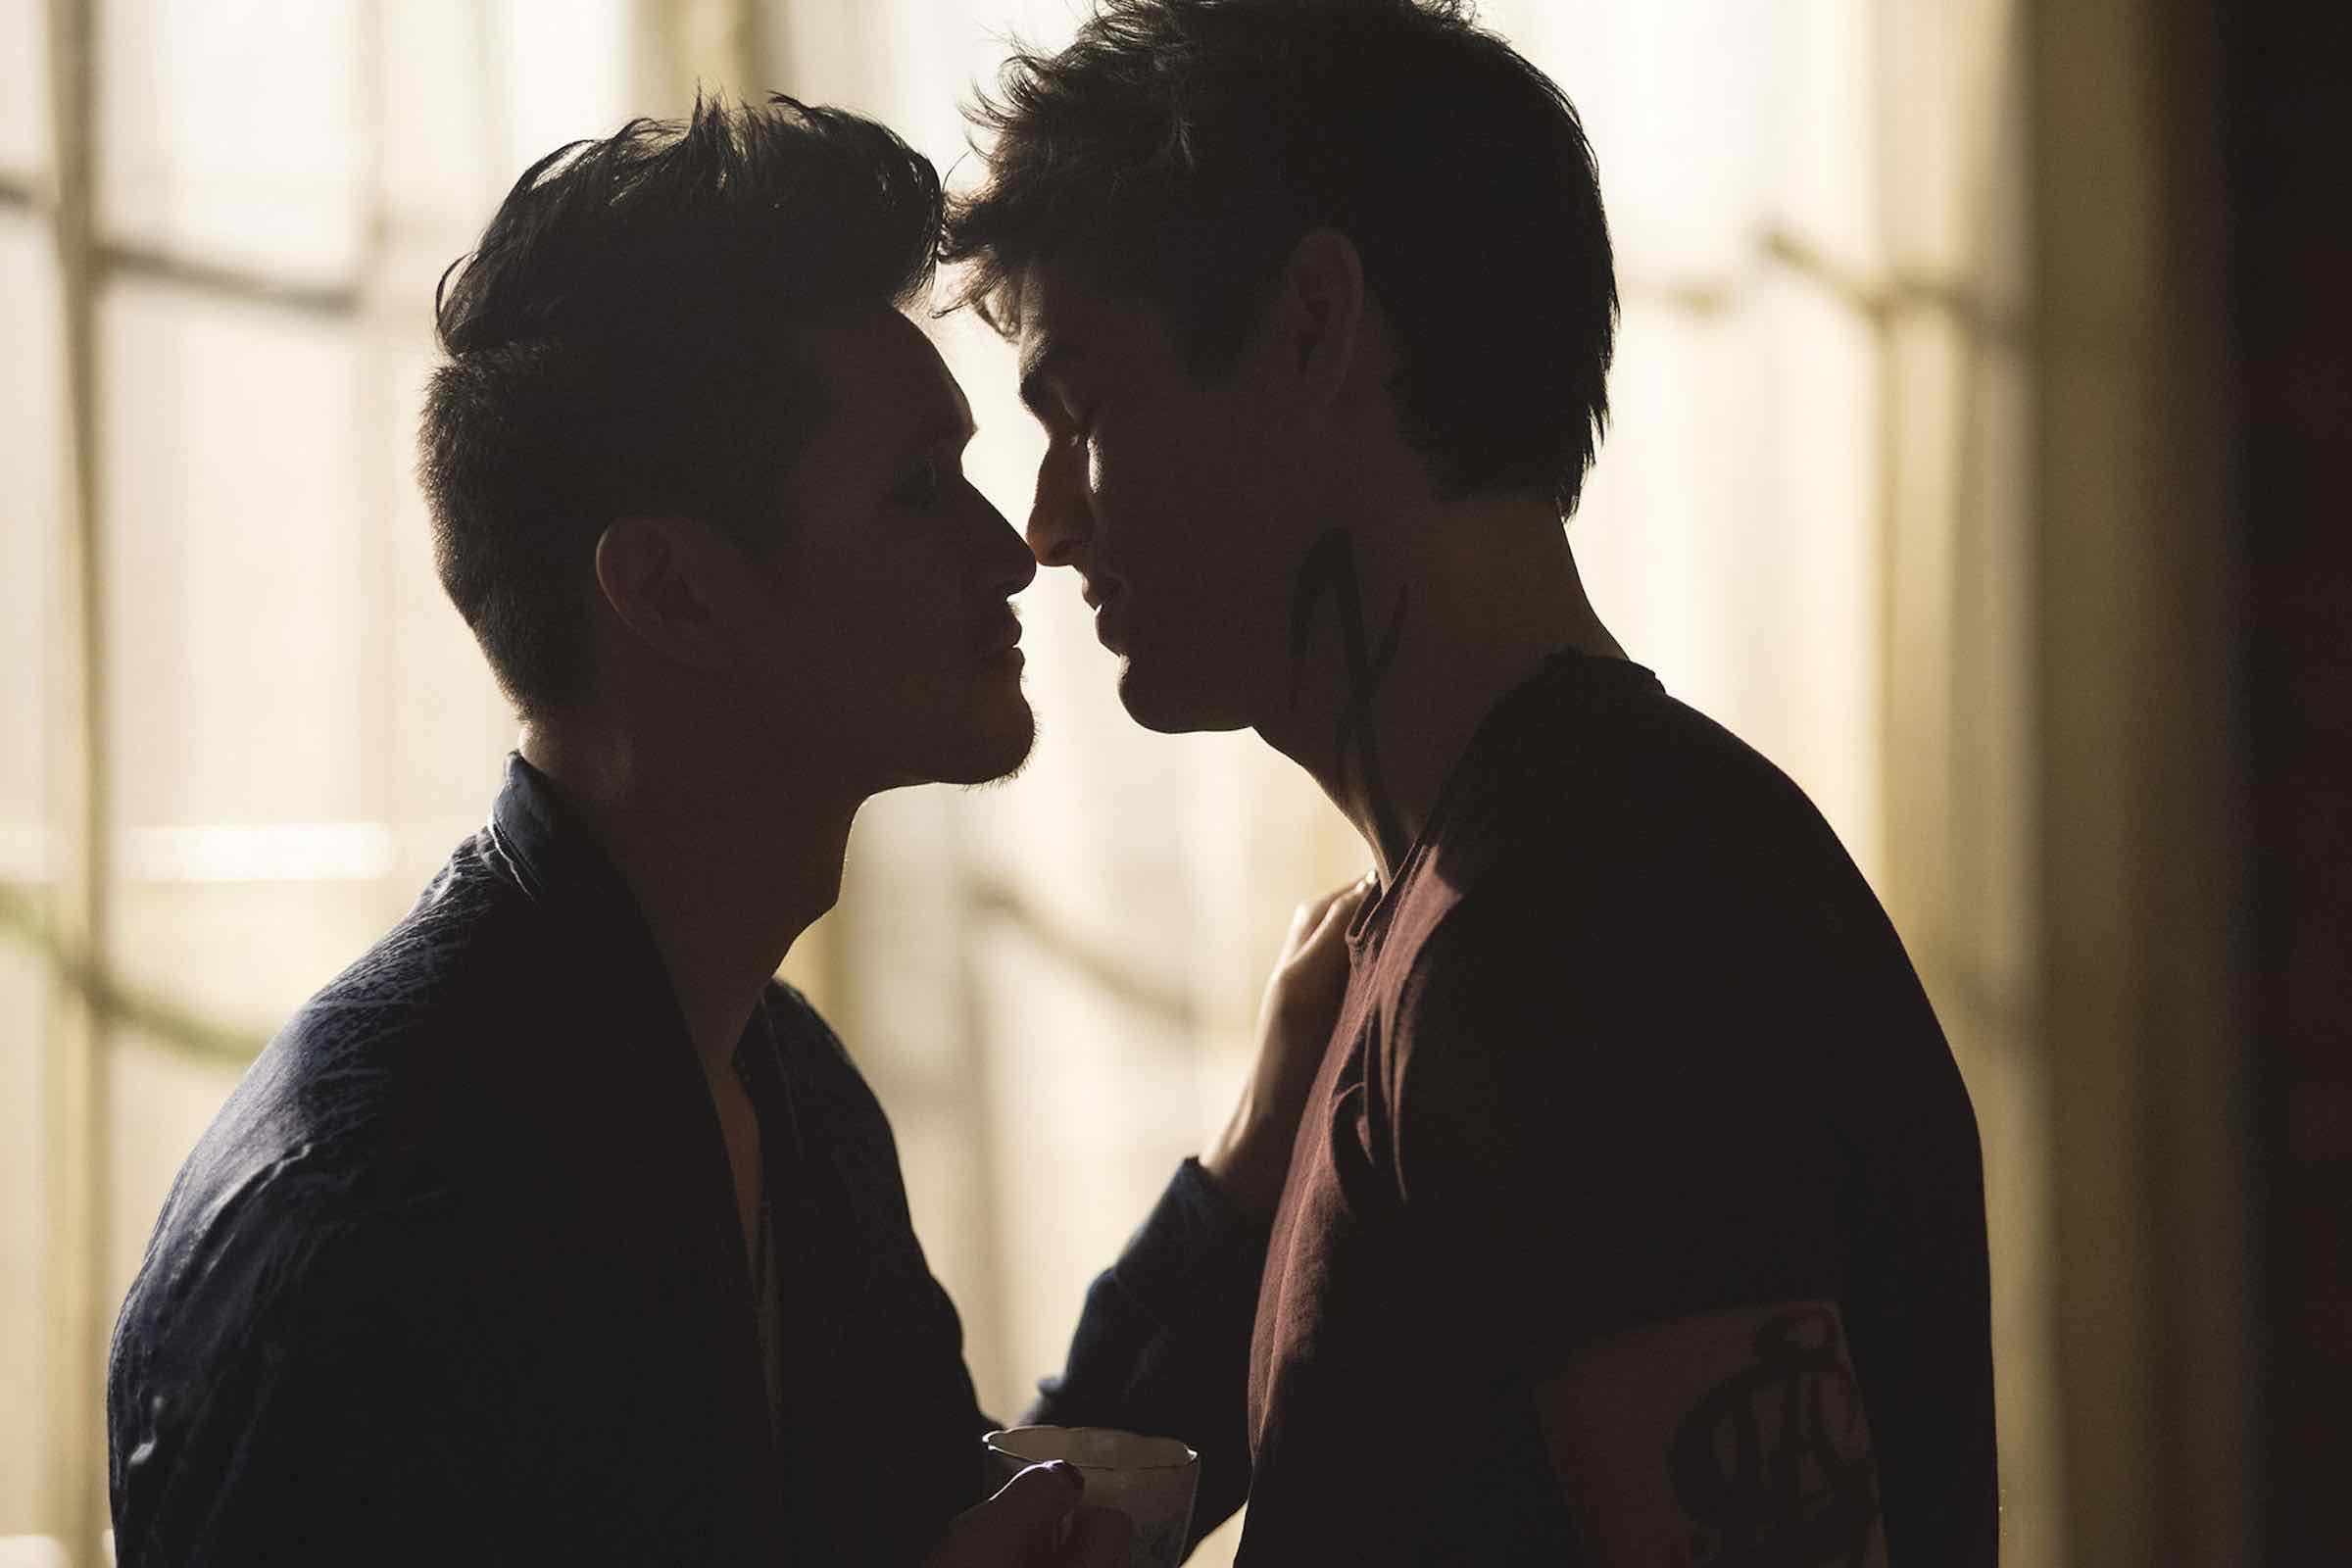 We decided one 'Shadowhunters' Malec quiz wasn’t enough, so here we are with a second, equally magical Malec quiz with plenty of Matthew Daddario.